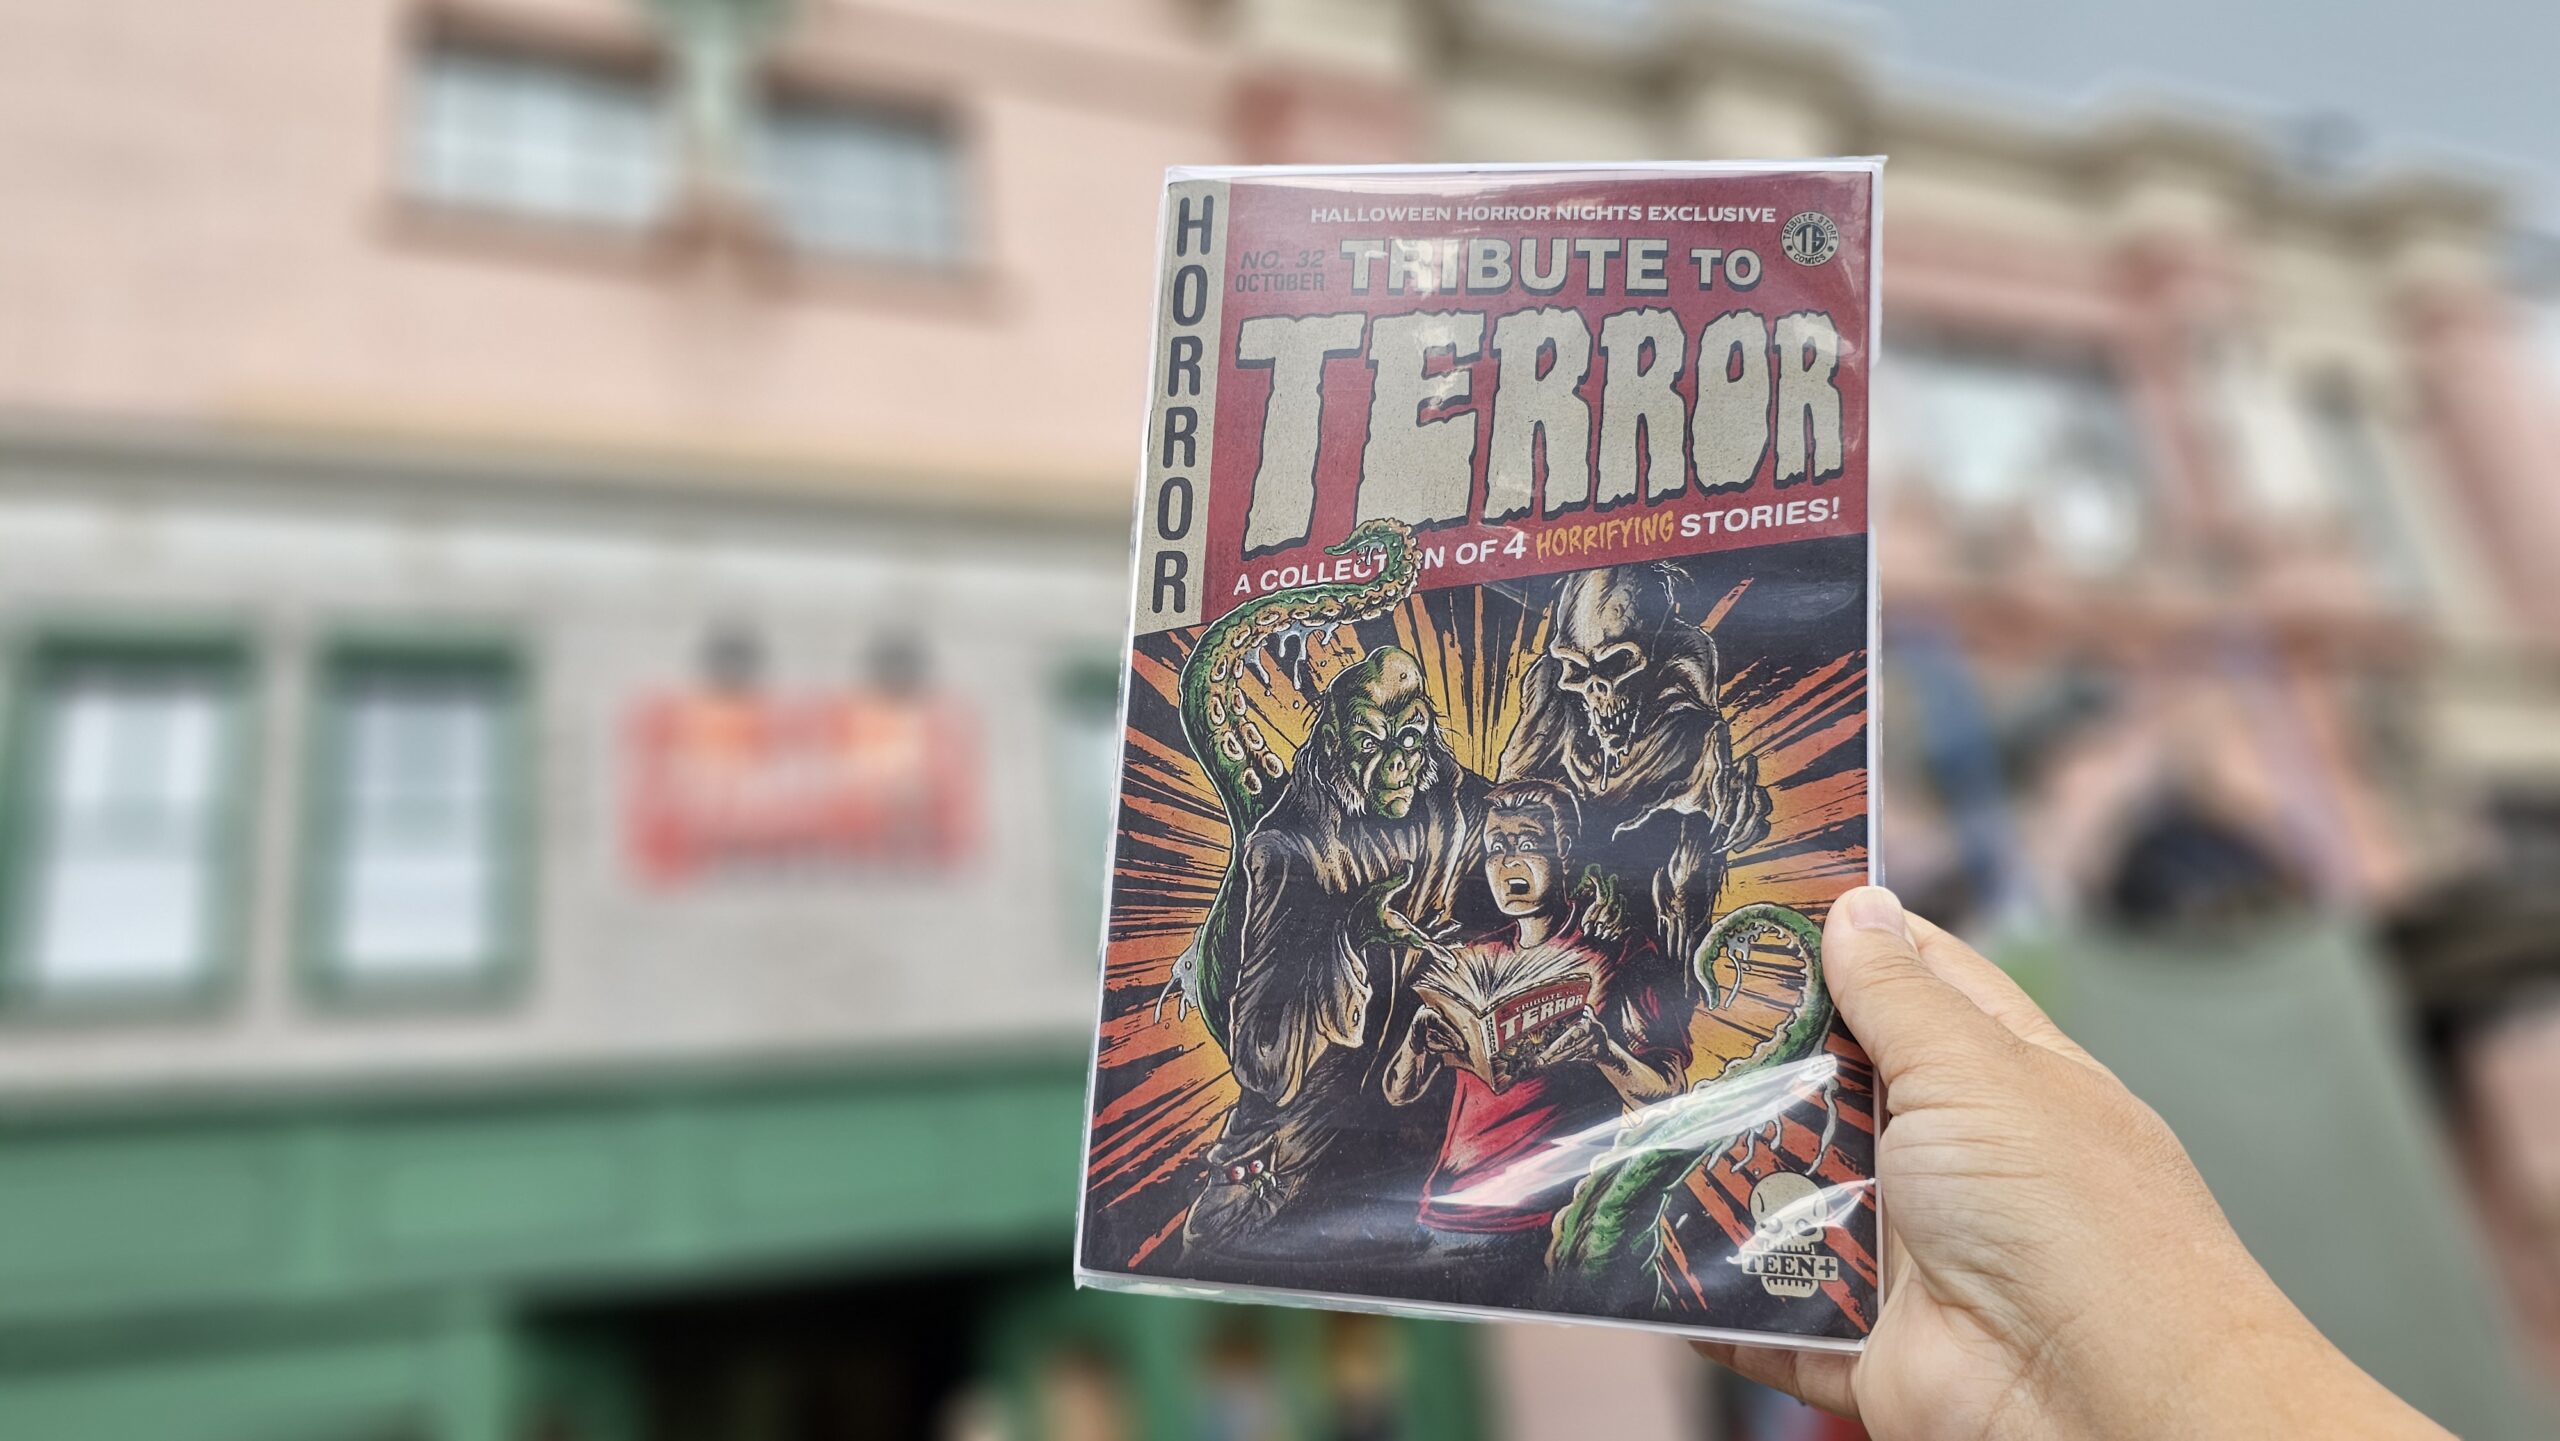 SATURDAY SIX Looks at HHN 32 – Part I: Inside this year's TRIBUTE STORE  (The Amazing Details, Snacks, Easter Eggs and more!)